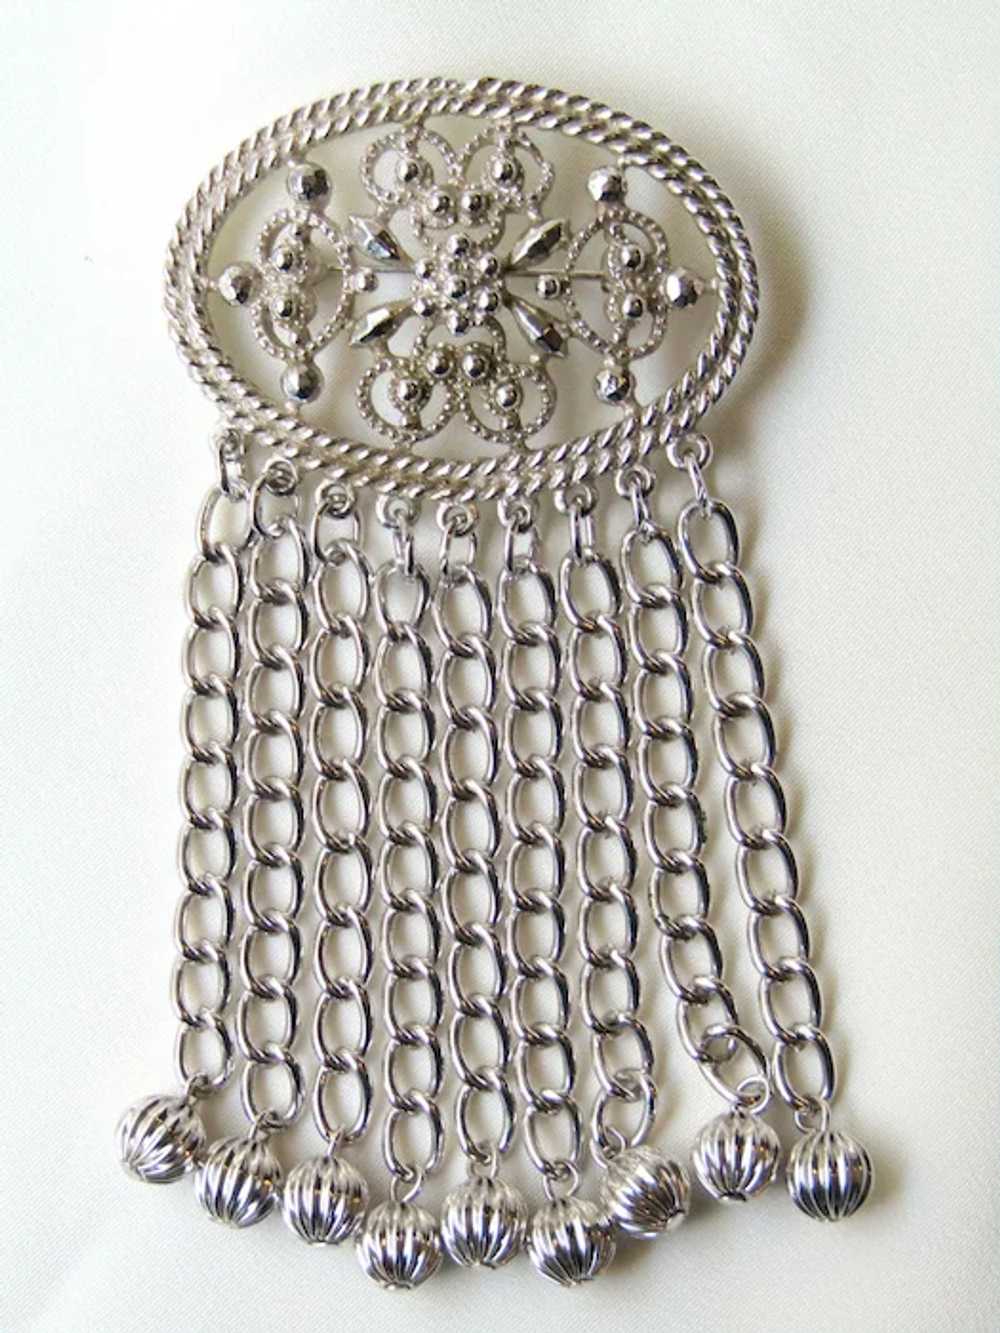 Vintage Sarah Coventry Chains Brooch Pin - image 2